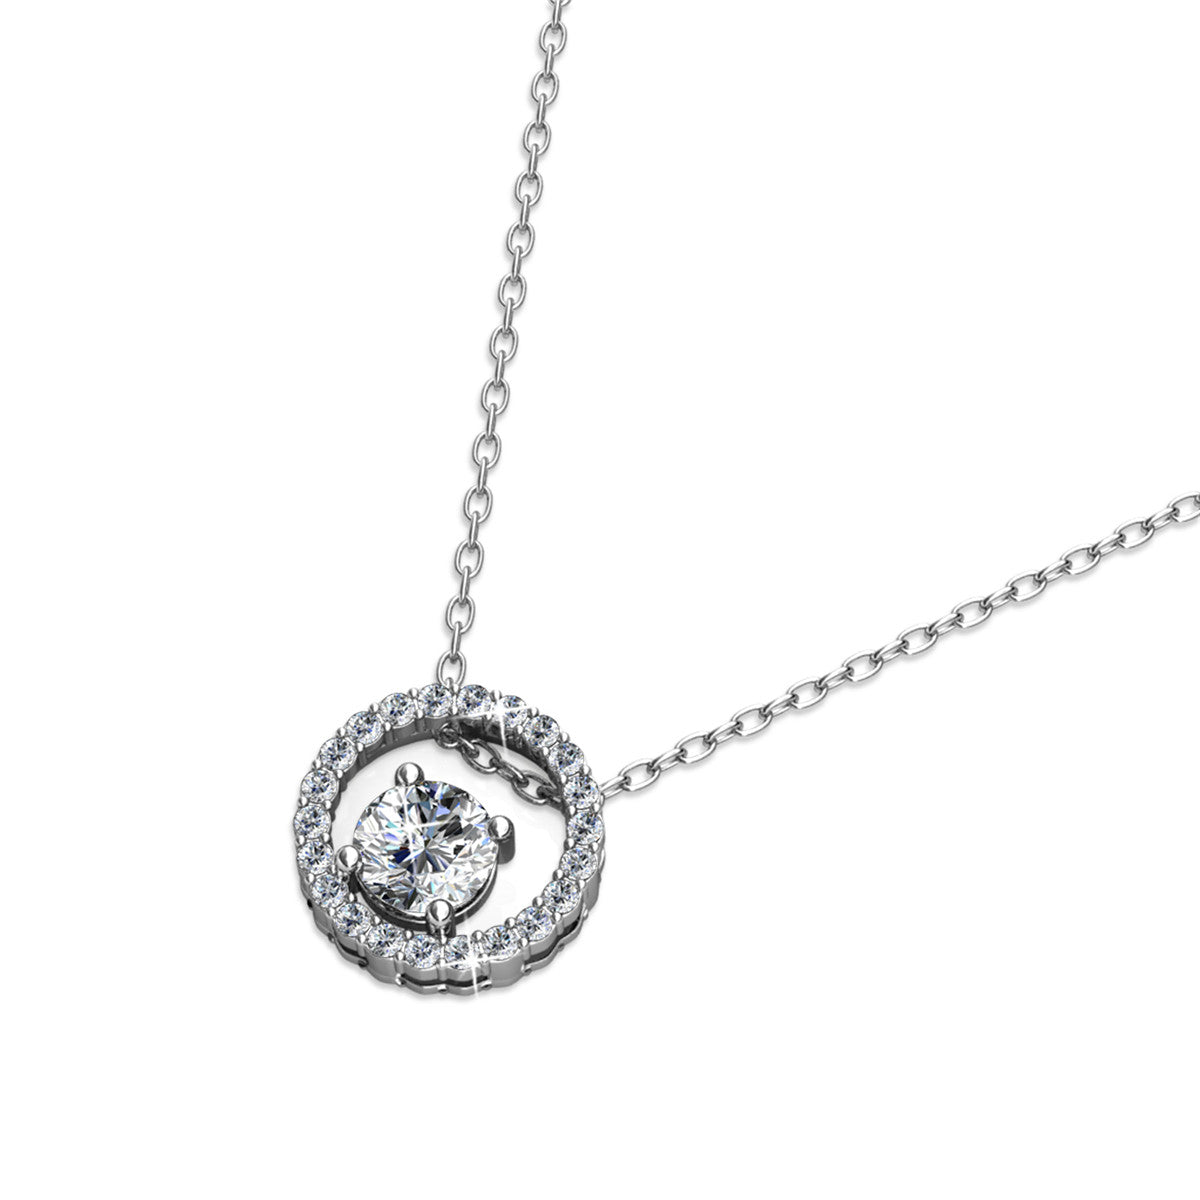 Reign 18k White Gold Plated Halo Crystal Necklace